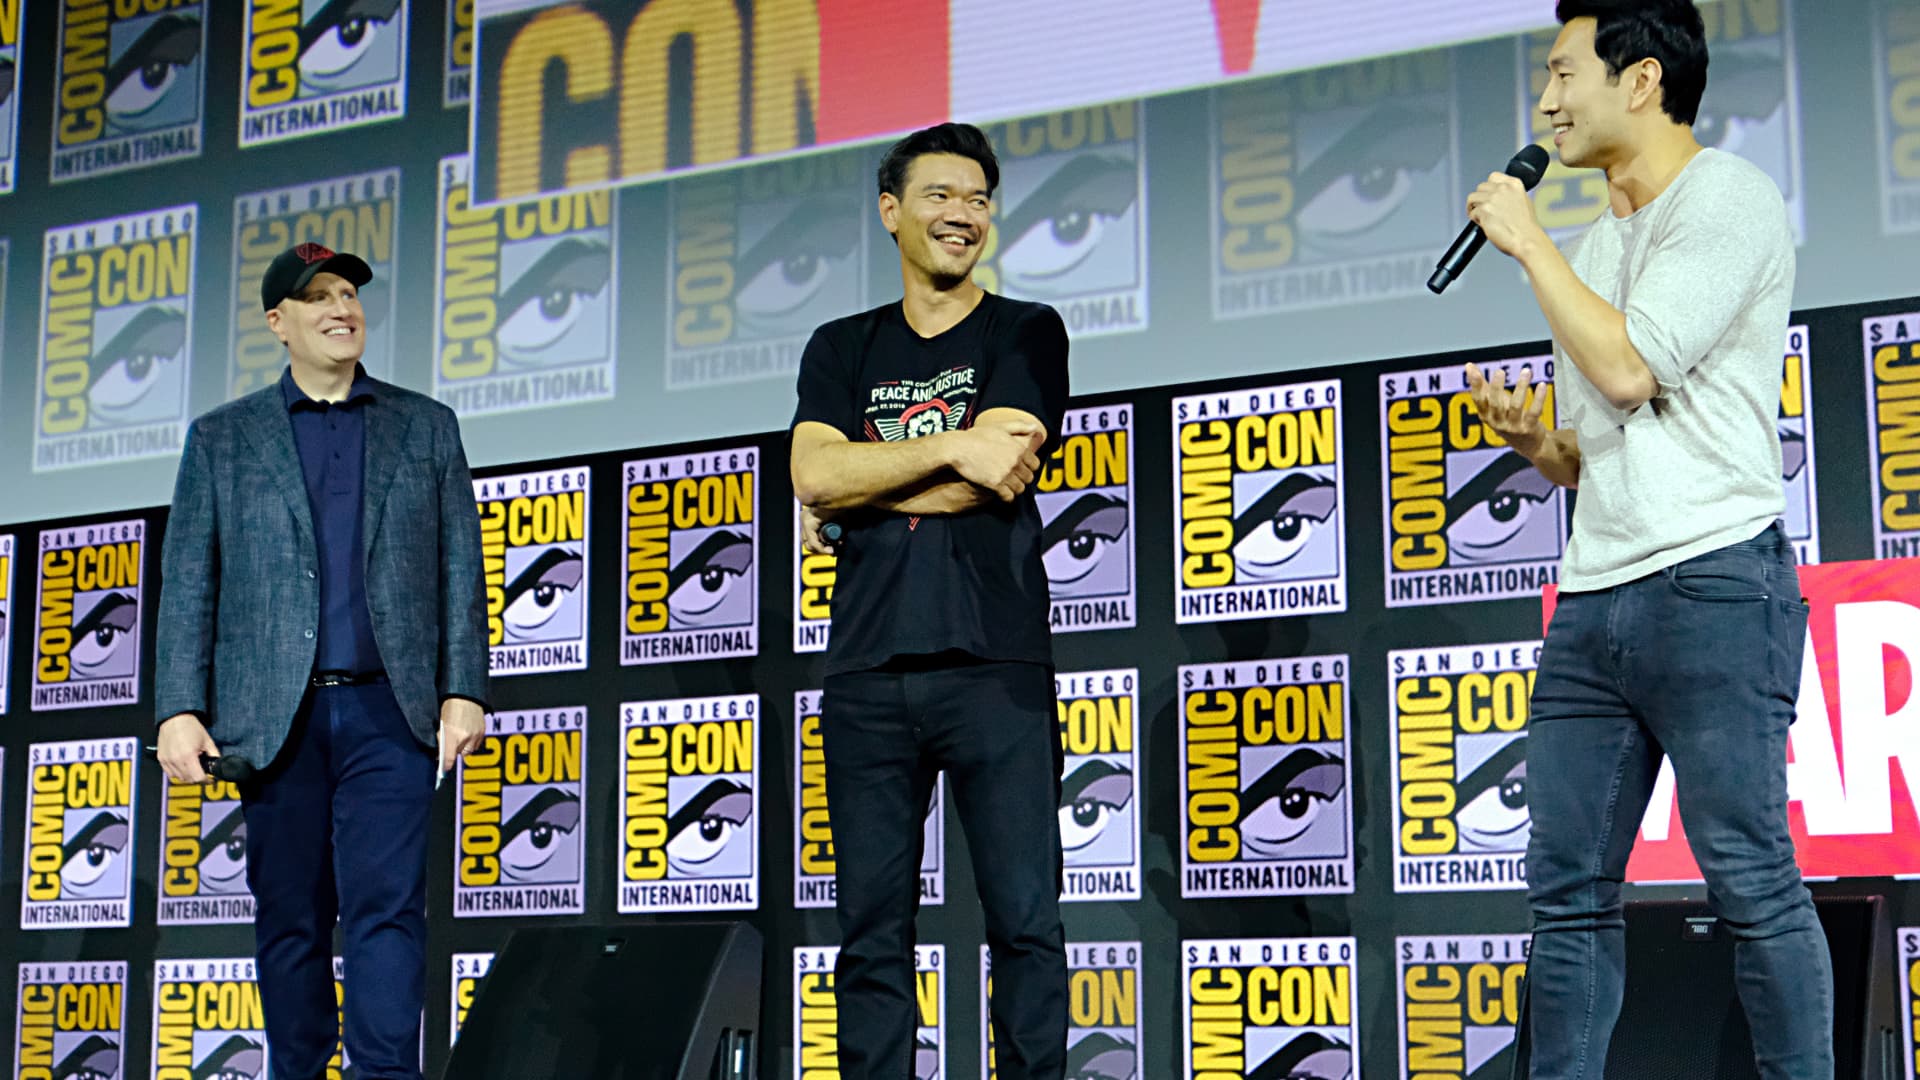 President of Marvel Studios Kevin Feige, Director Destin Daniel Cretton and Simu Liu of Marvel Studios' 'Shang-Chi and the Legend of the Ten Rings' at the San Diego Comic-Con International 2019 Marvel Studios Panel in Hall H on July 20, 2019 in San Diego, California.